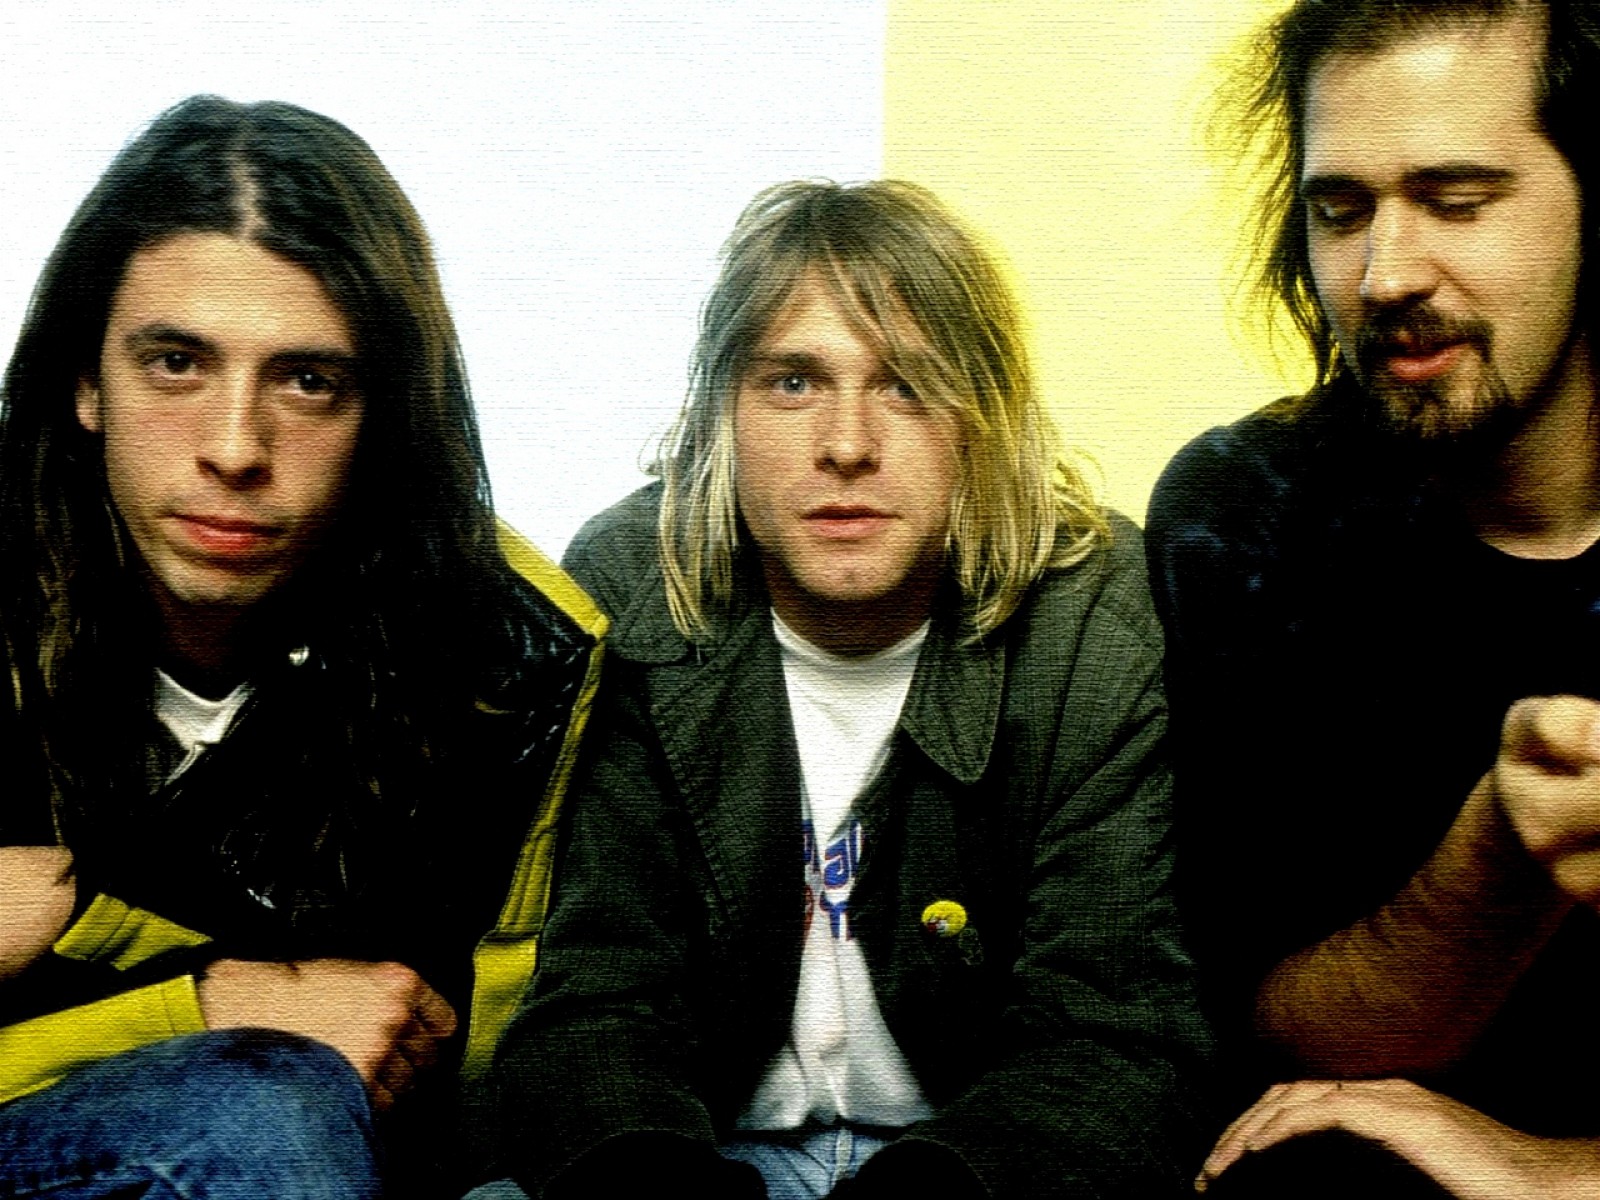 Nirvana Heart Shaped Box Directors Cut Video Online For The First Time